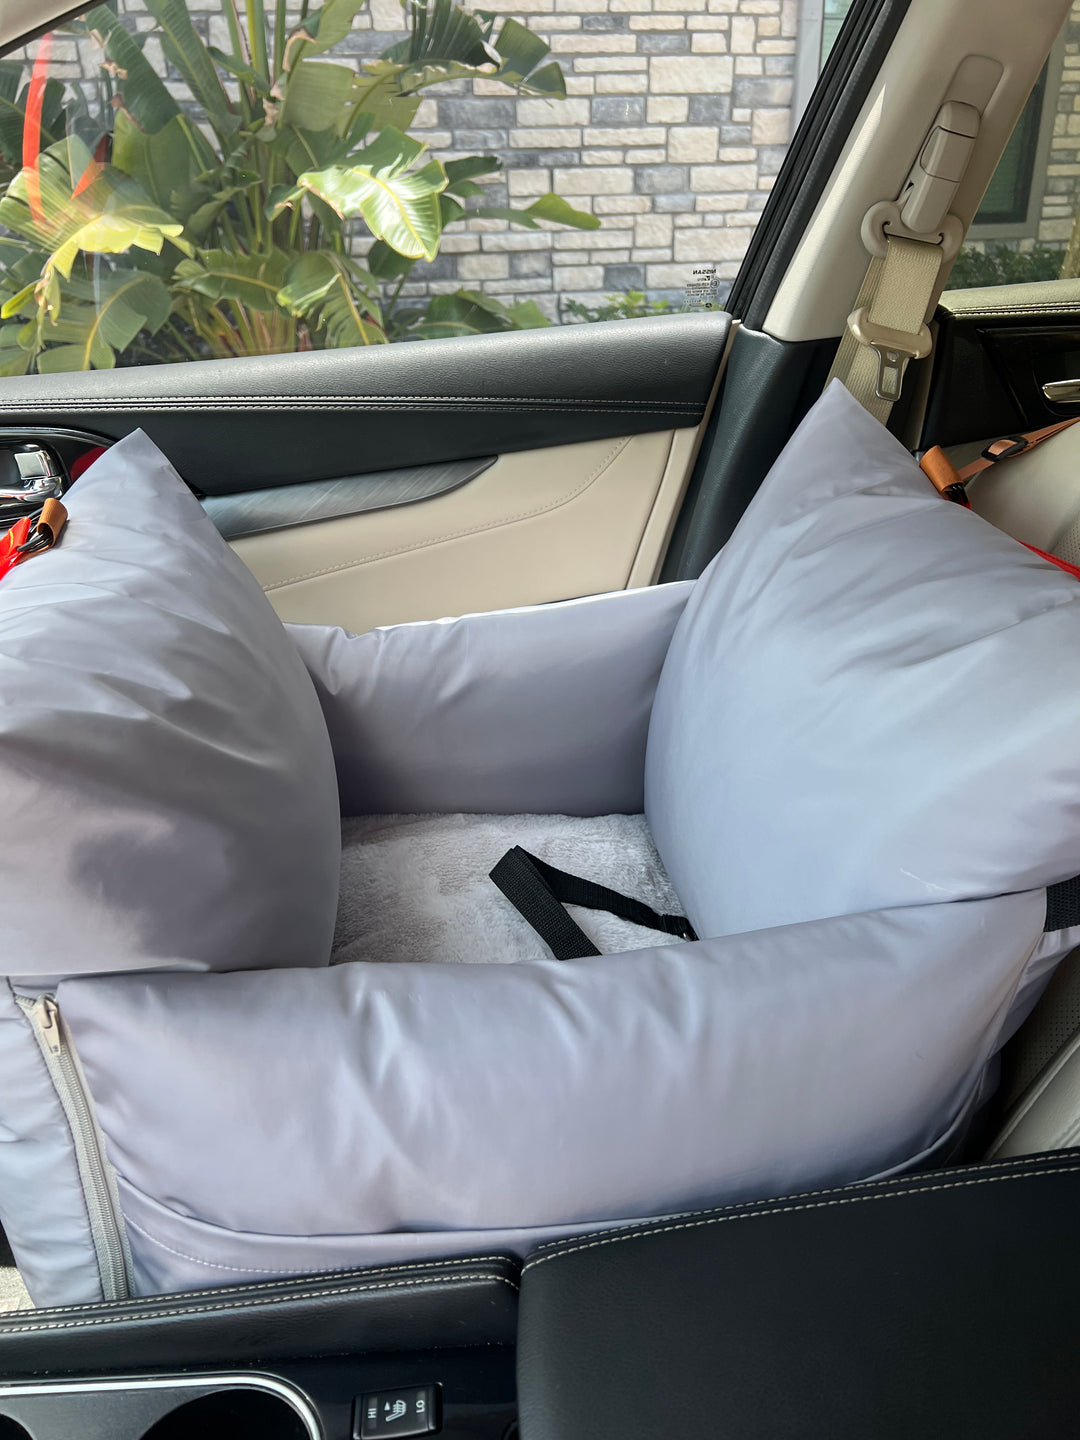 PupPup Travel Bed